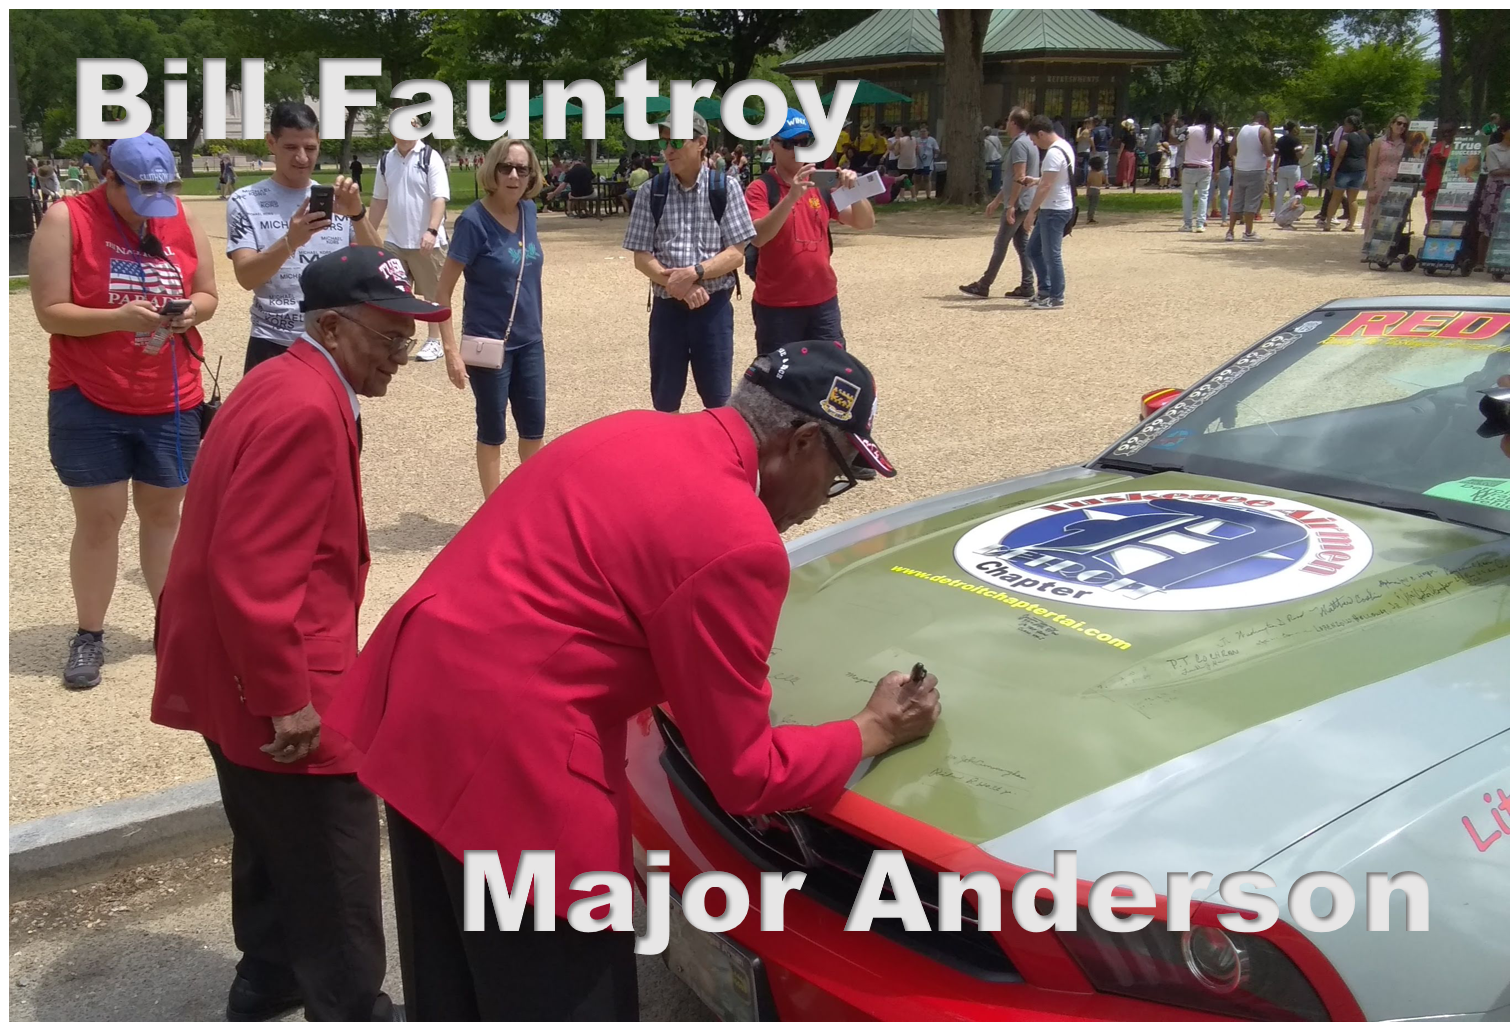 Fauntroy and Anderson